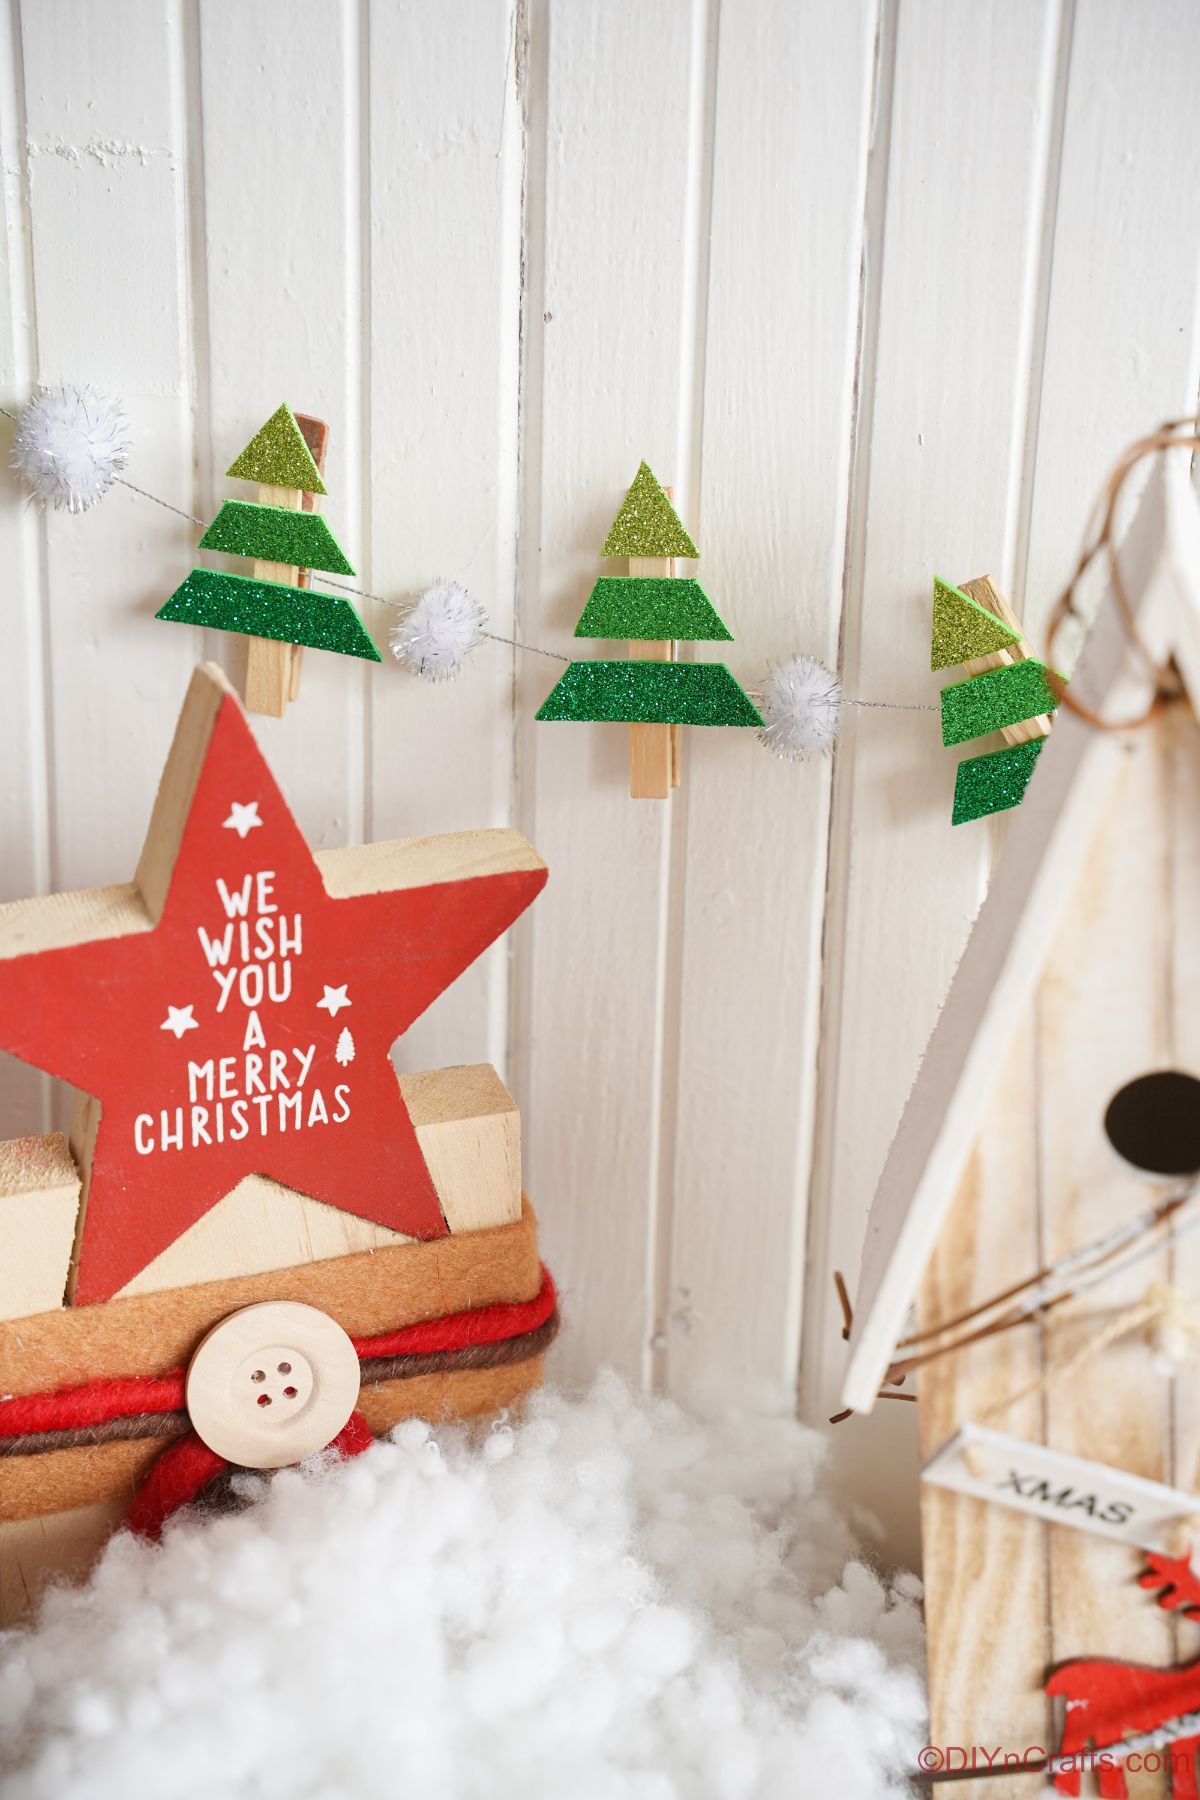 mini foam christmas tree on clothespins hanging on white shiplap behind holiday star decoration